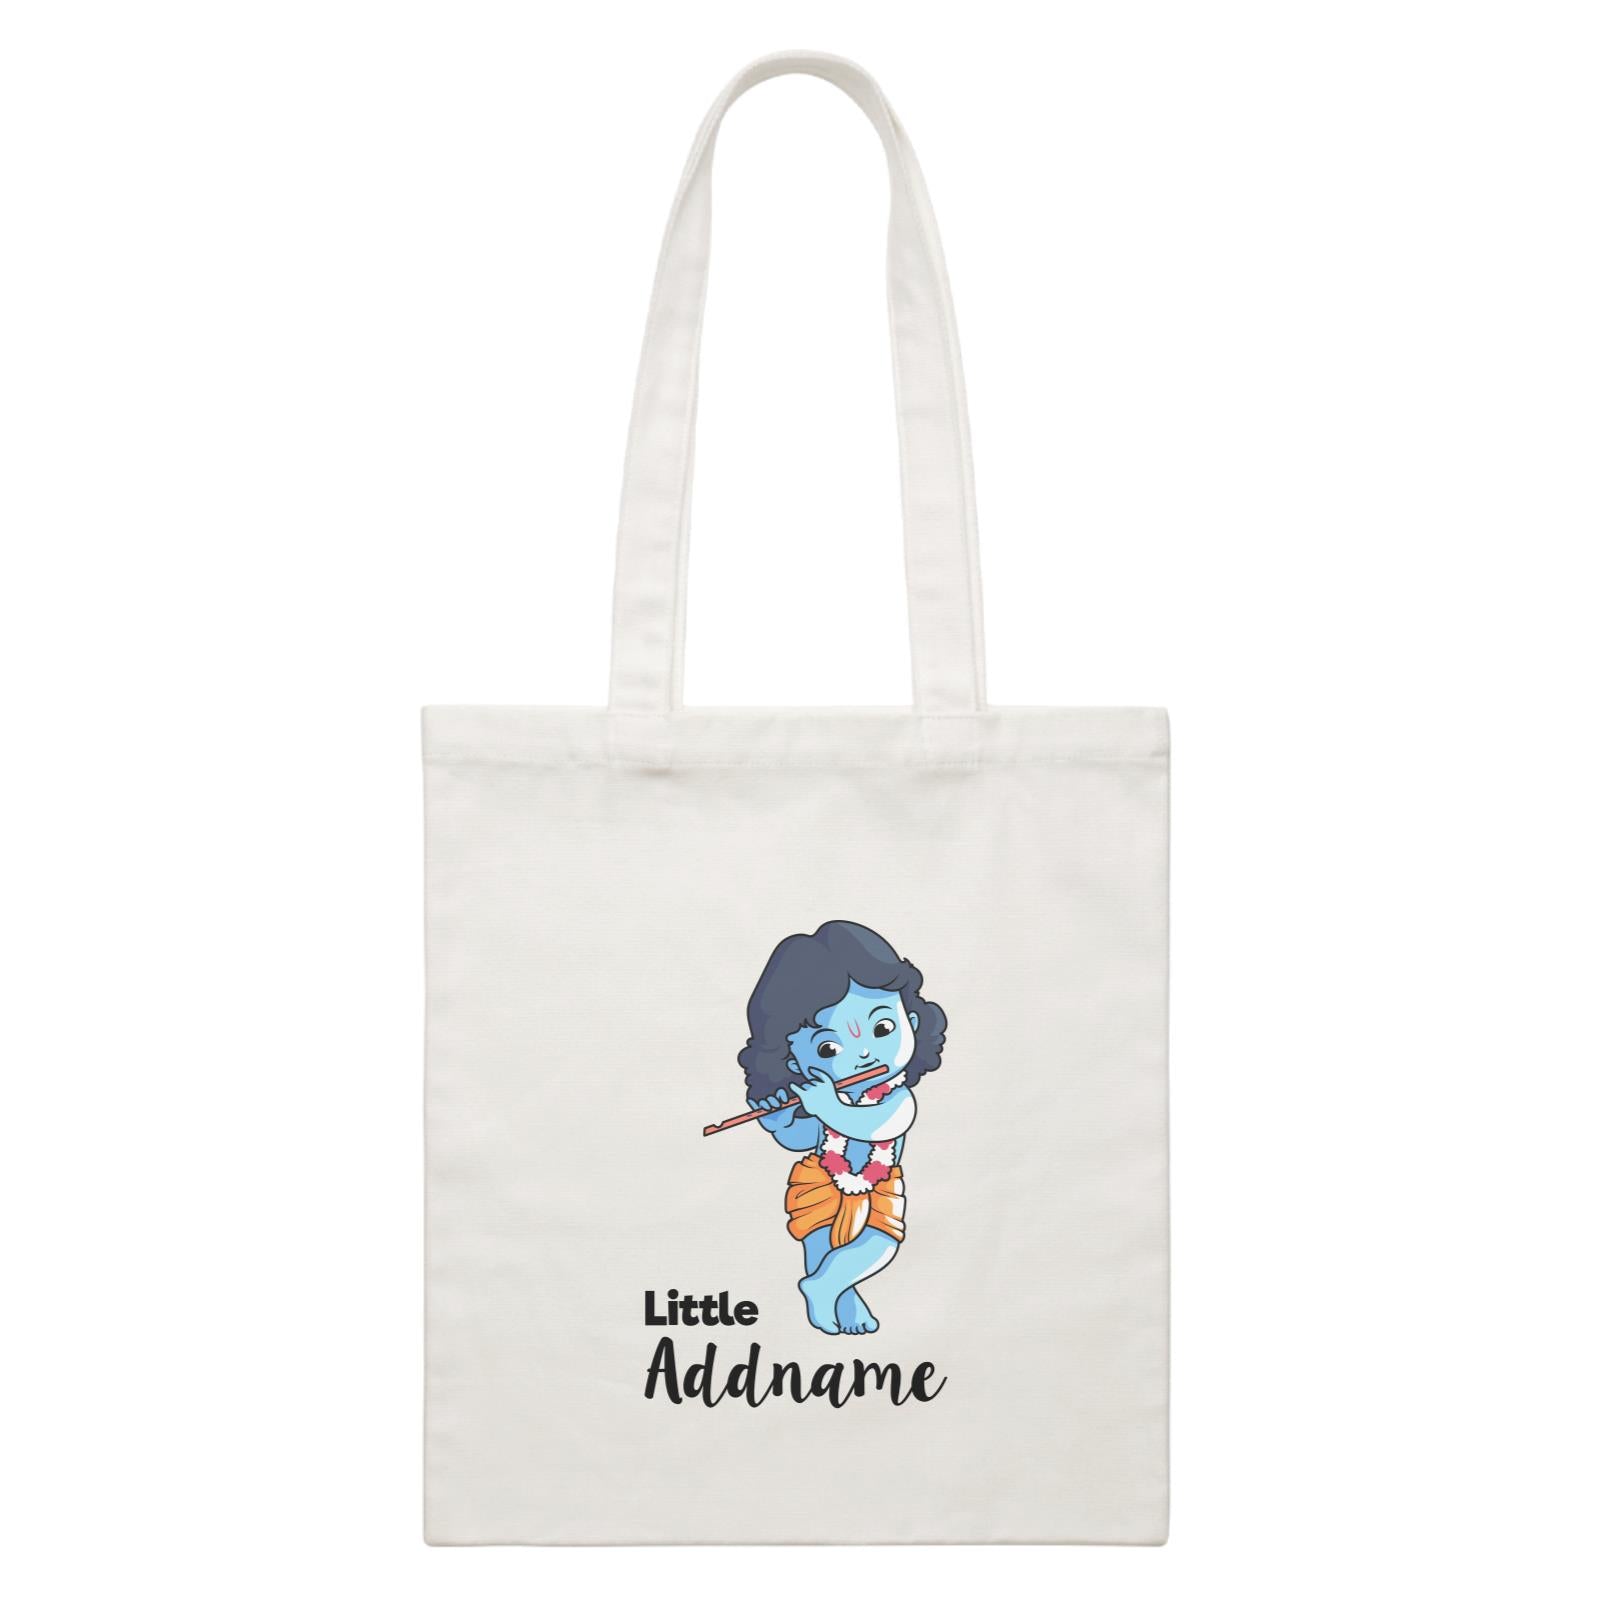 Cute Krishna With Flower Garland Playing Flute Little Addname White Canvas Bag